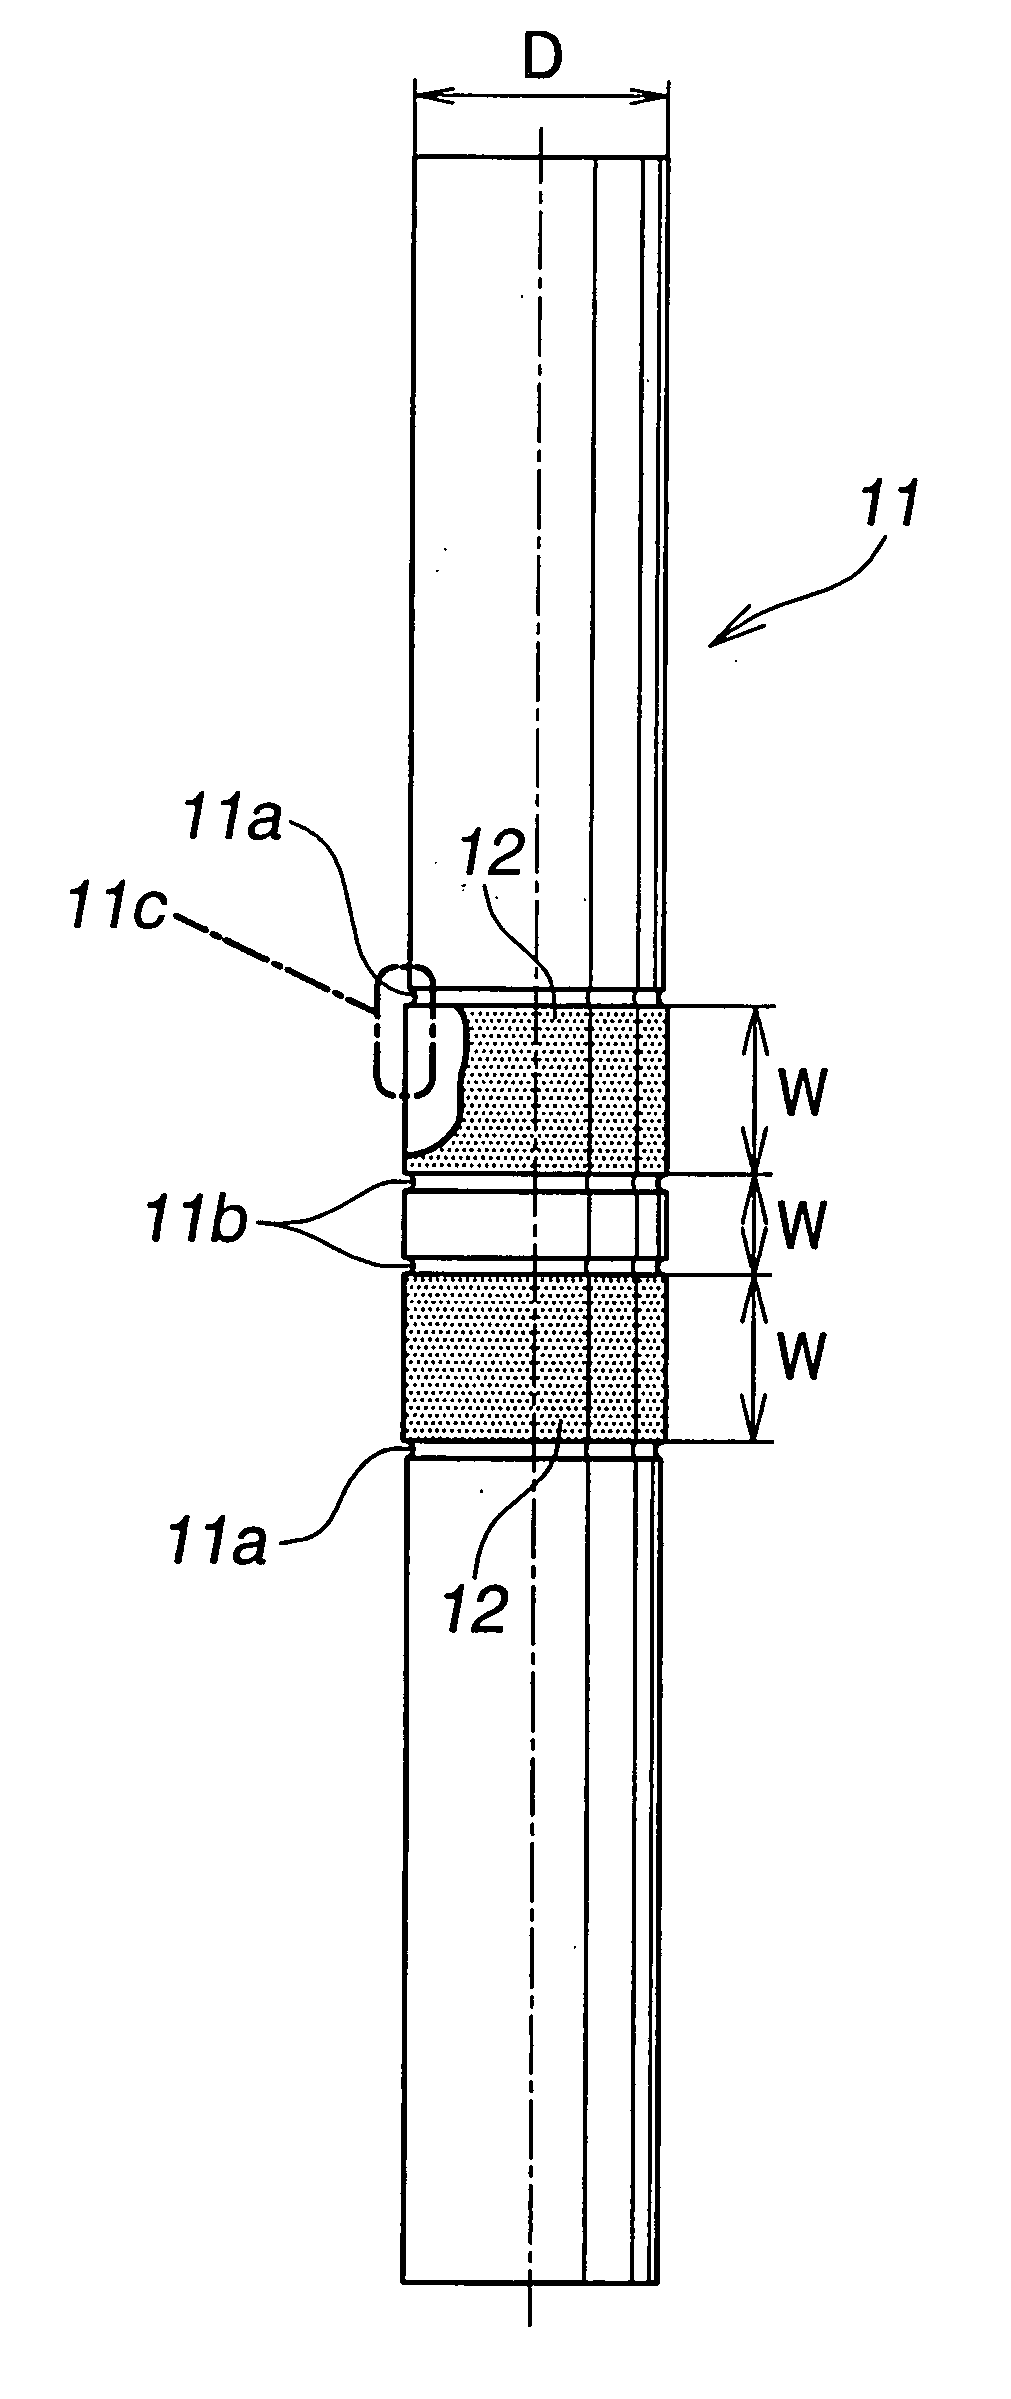 Magnetostrictive coat forming method, magnetostrictive torque sensor manufacturing method, and electric power steering apparatus employing the sensor